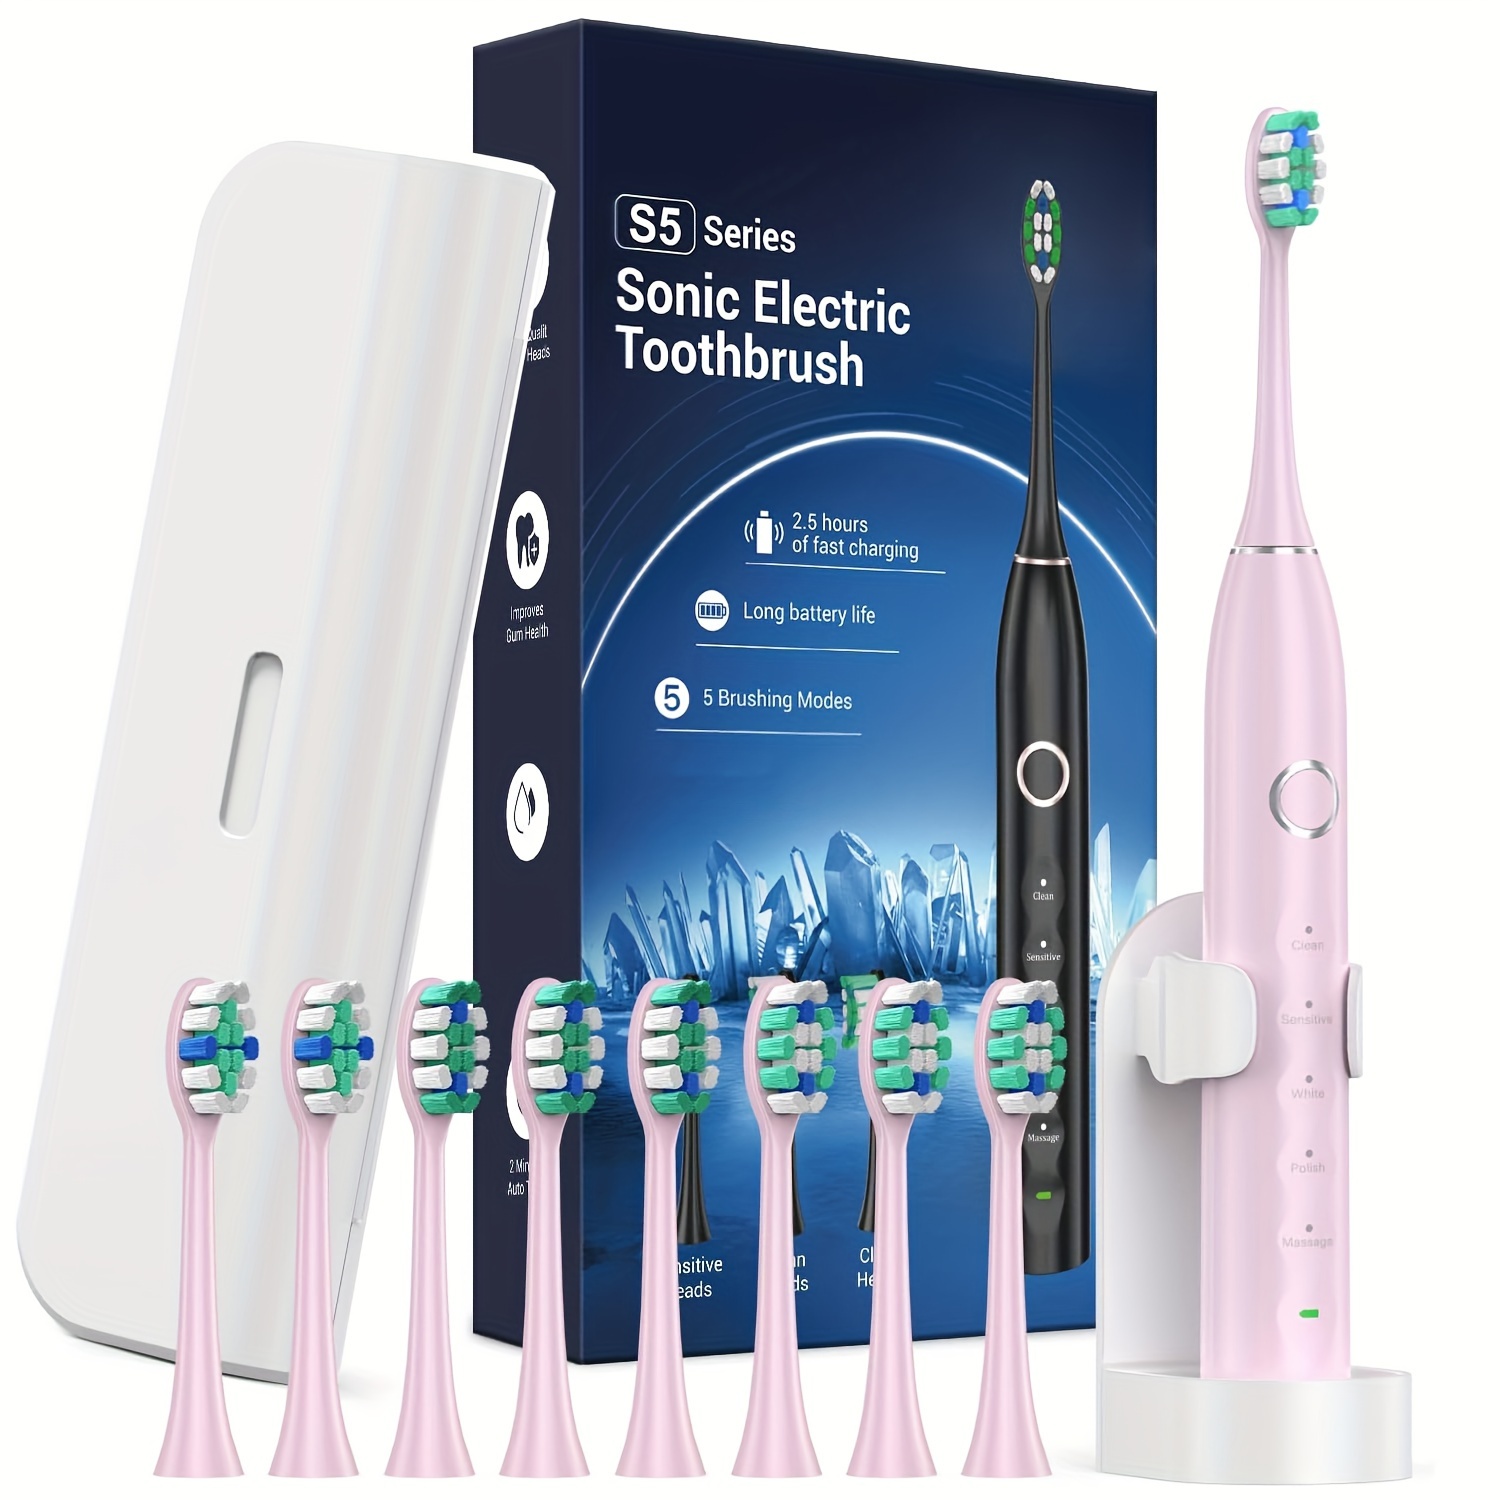 

Electric Toothbrush With 5 Modes, Smart Timer Effectively Cleans Teeth & Gums, Rechargeable, 8 Replacement Heads, Extra Soft Brush For Sensitive Teeth & Gums, Oral Care & Health